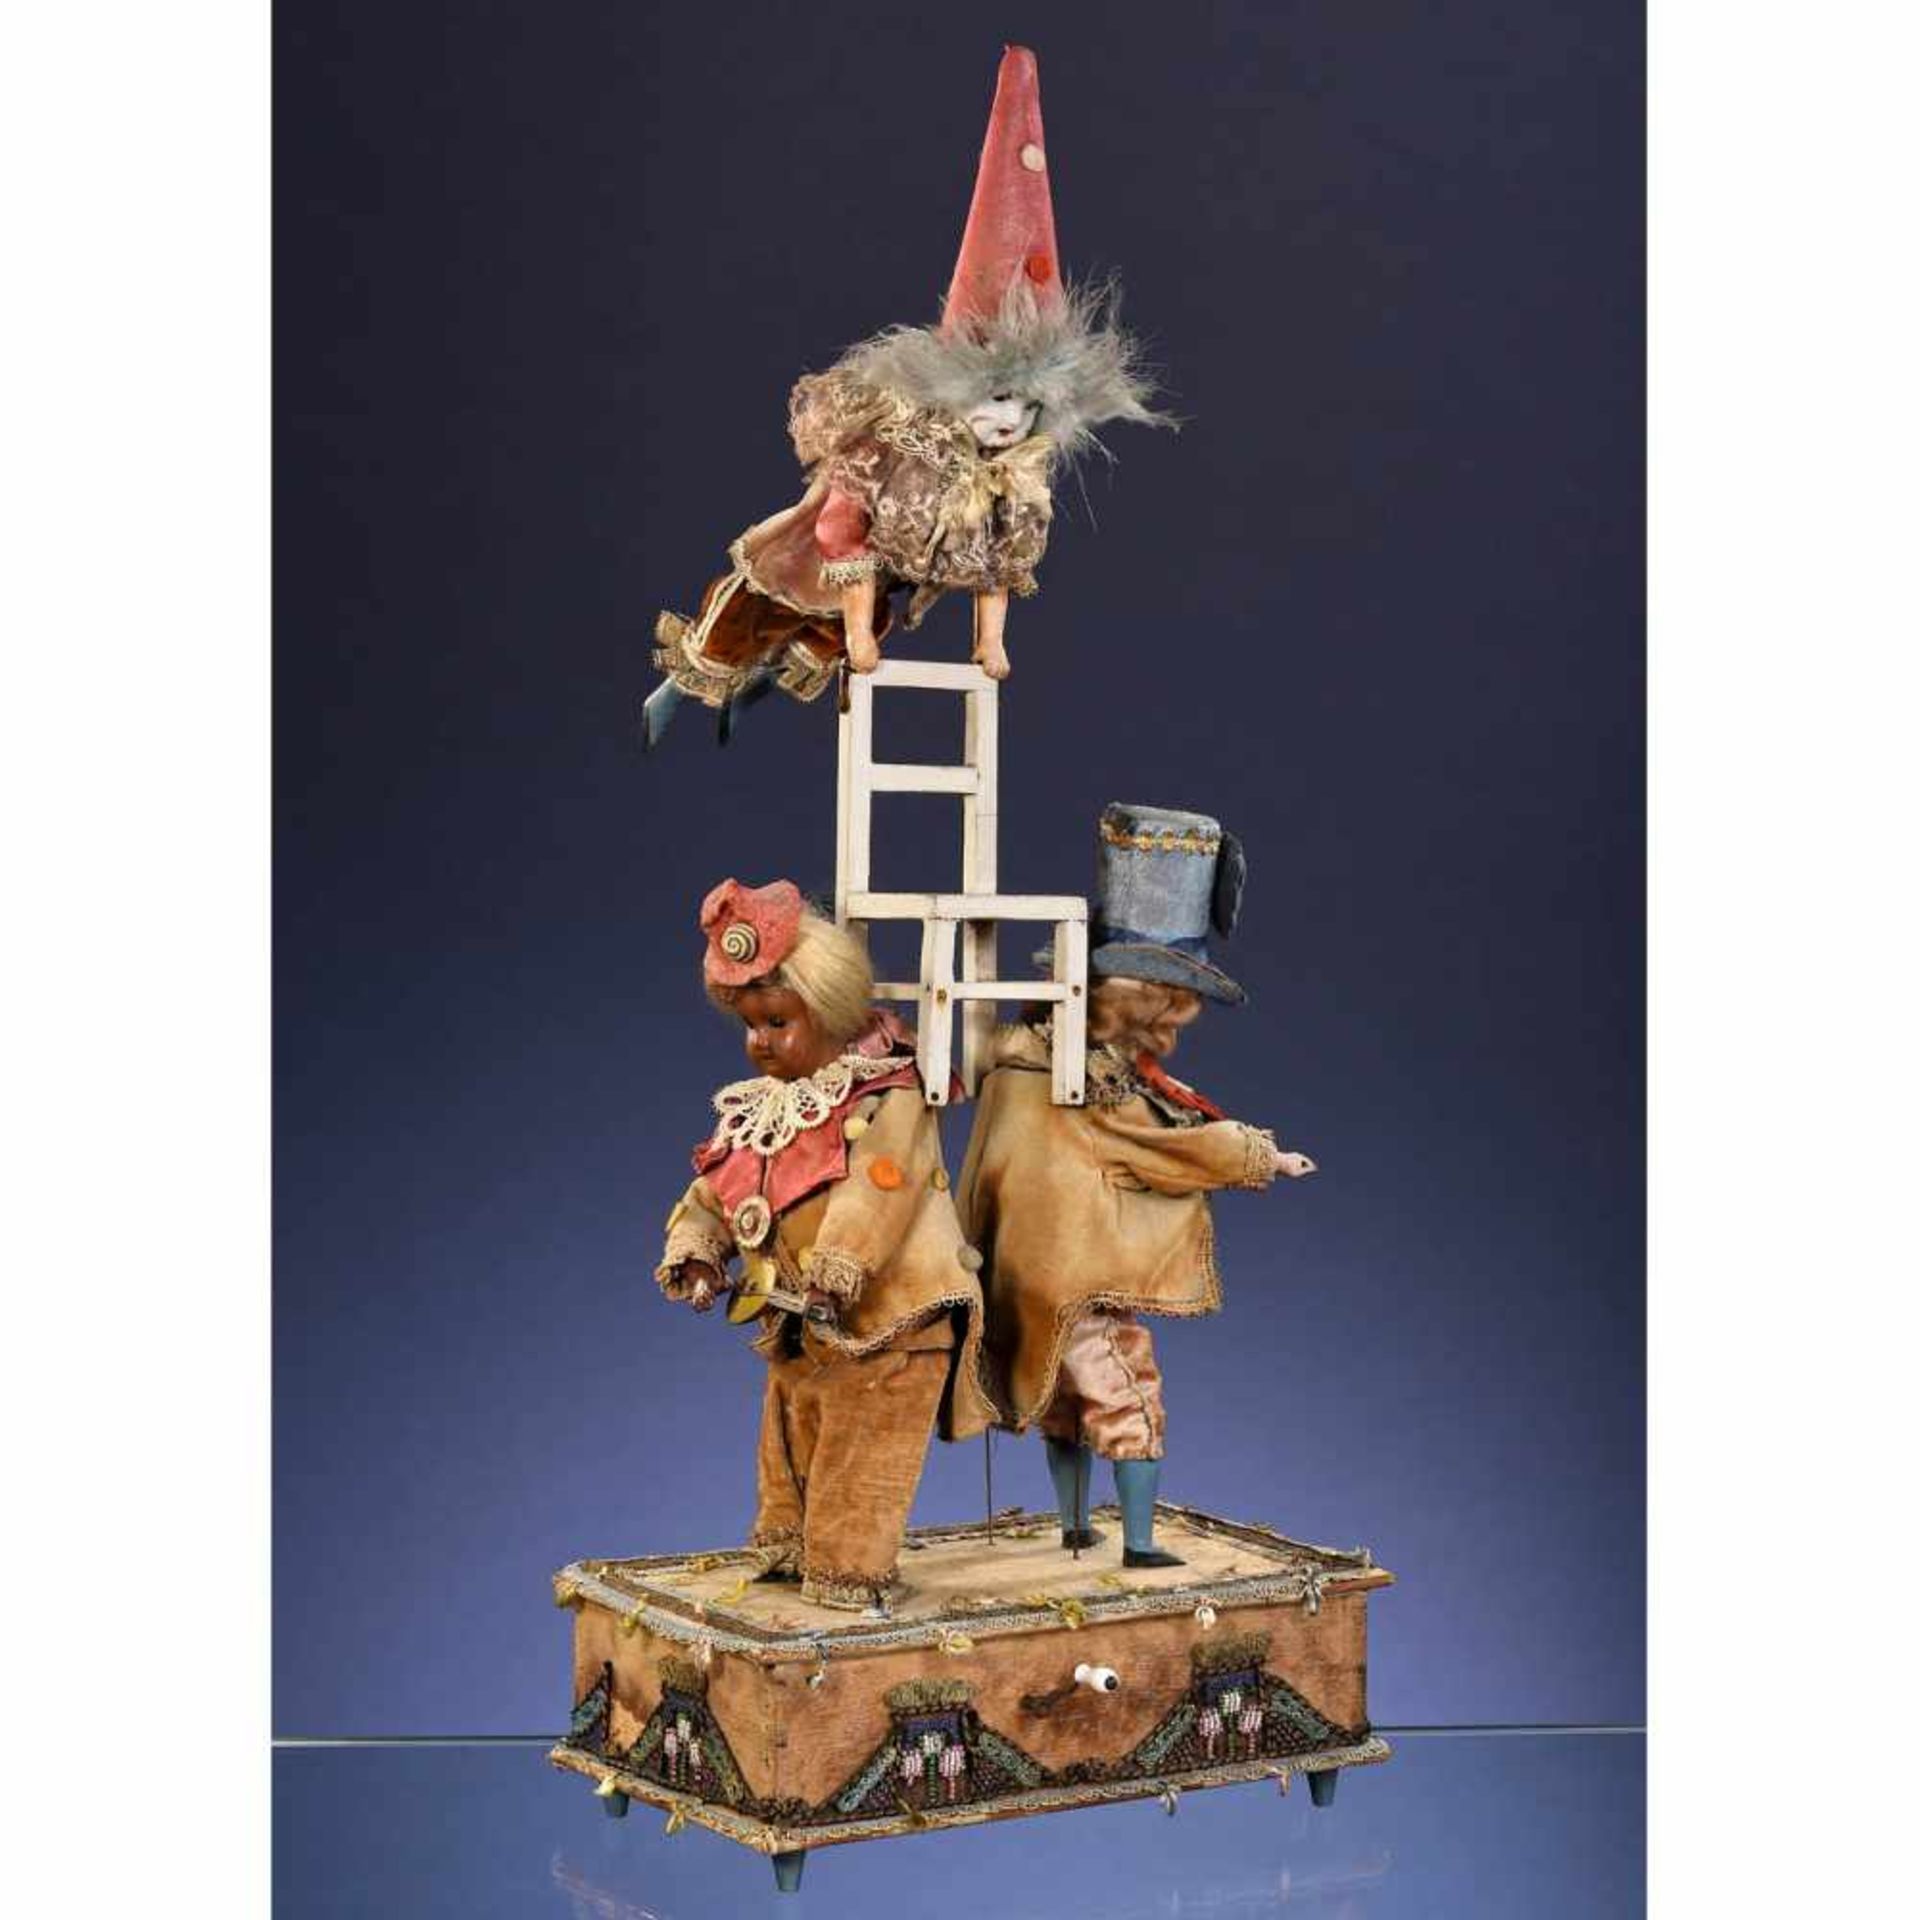 Unusual Musical Manivelle Musicians and Acrobat Automaton, c. 1920Maker unknown. Three figures